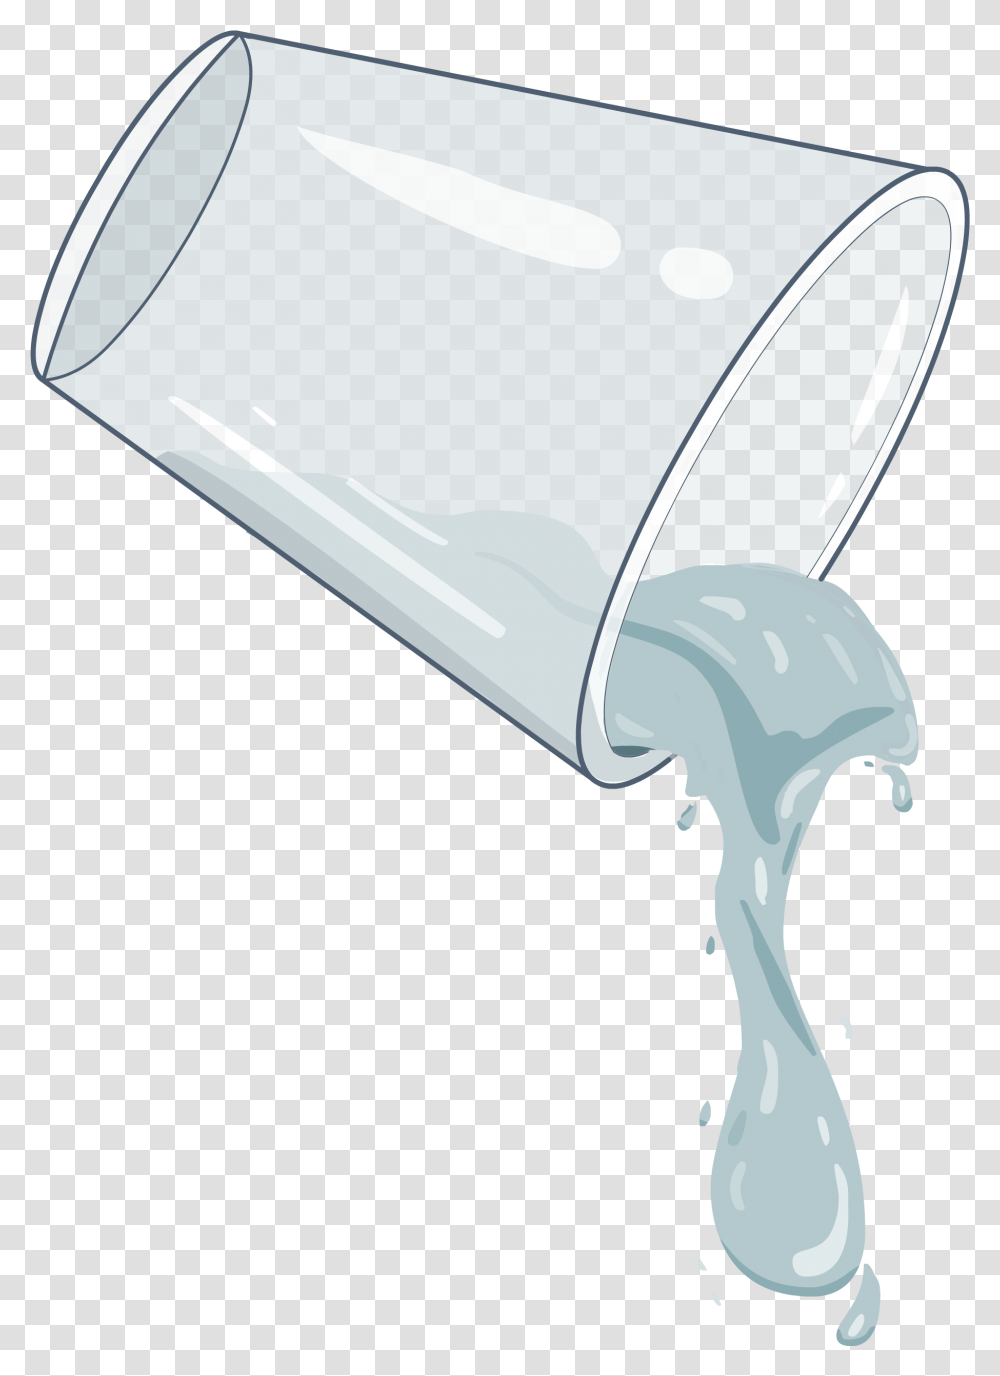 Water Pouring Pouring From A Glass, Milk, Beverage, Drink, Bottle Transparent Png